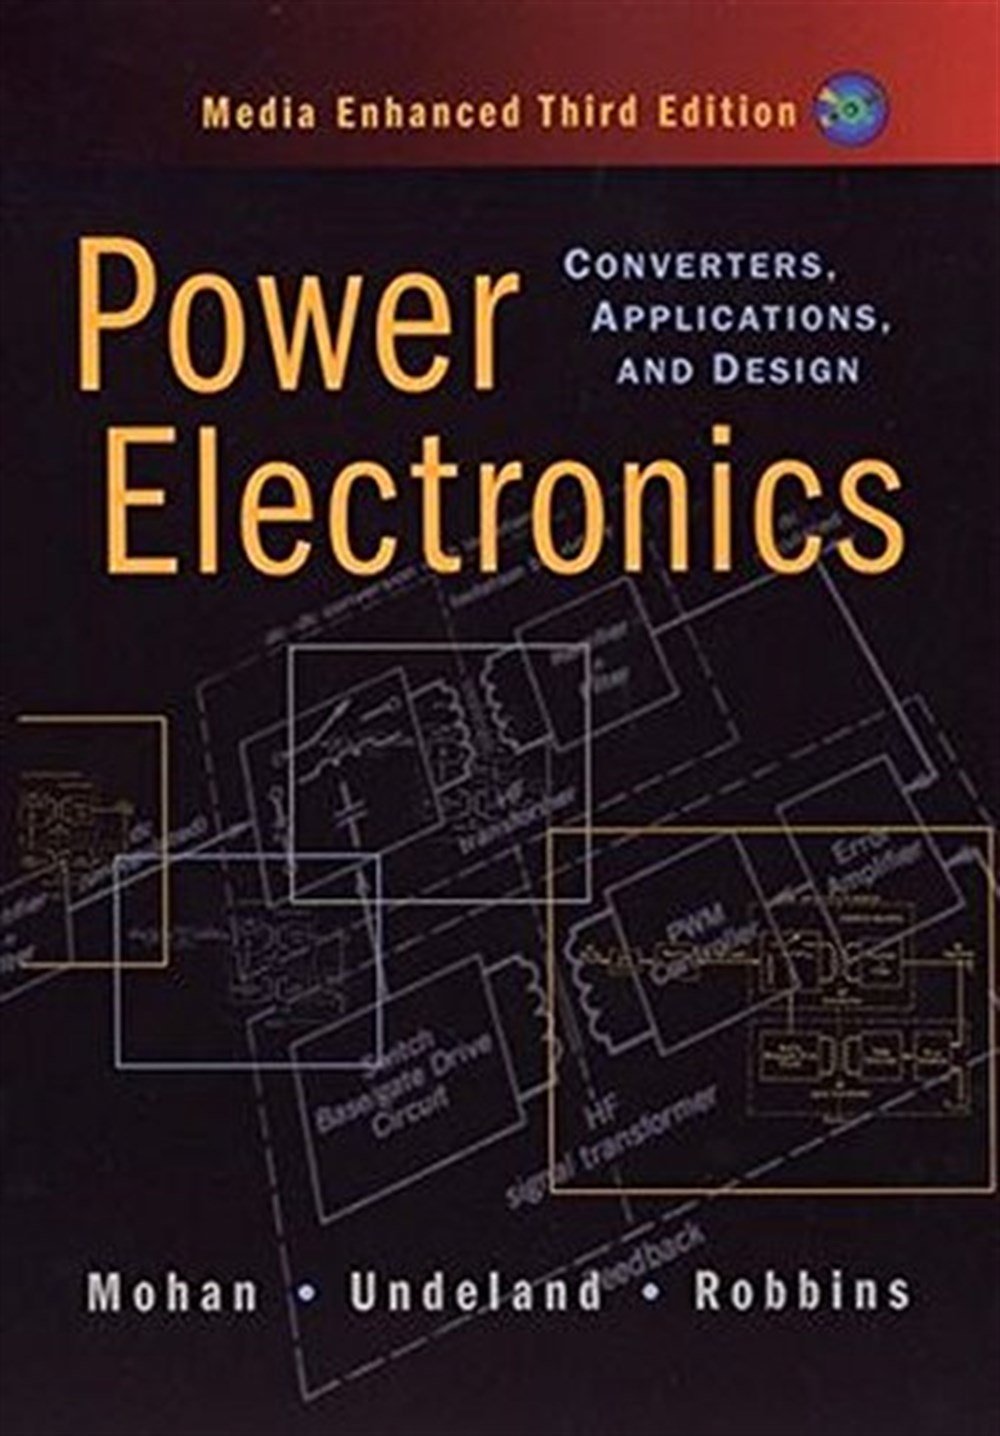 Power Electronics: Converters, Applications and Design, 3rd Ed.